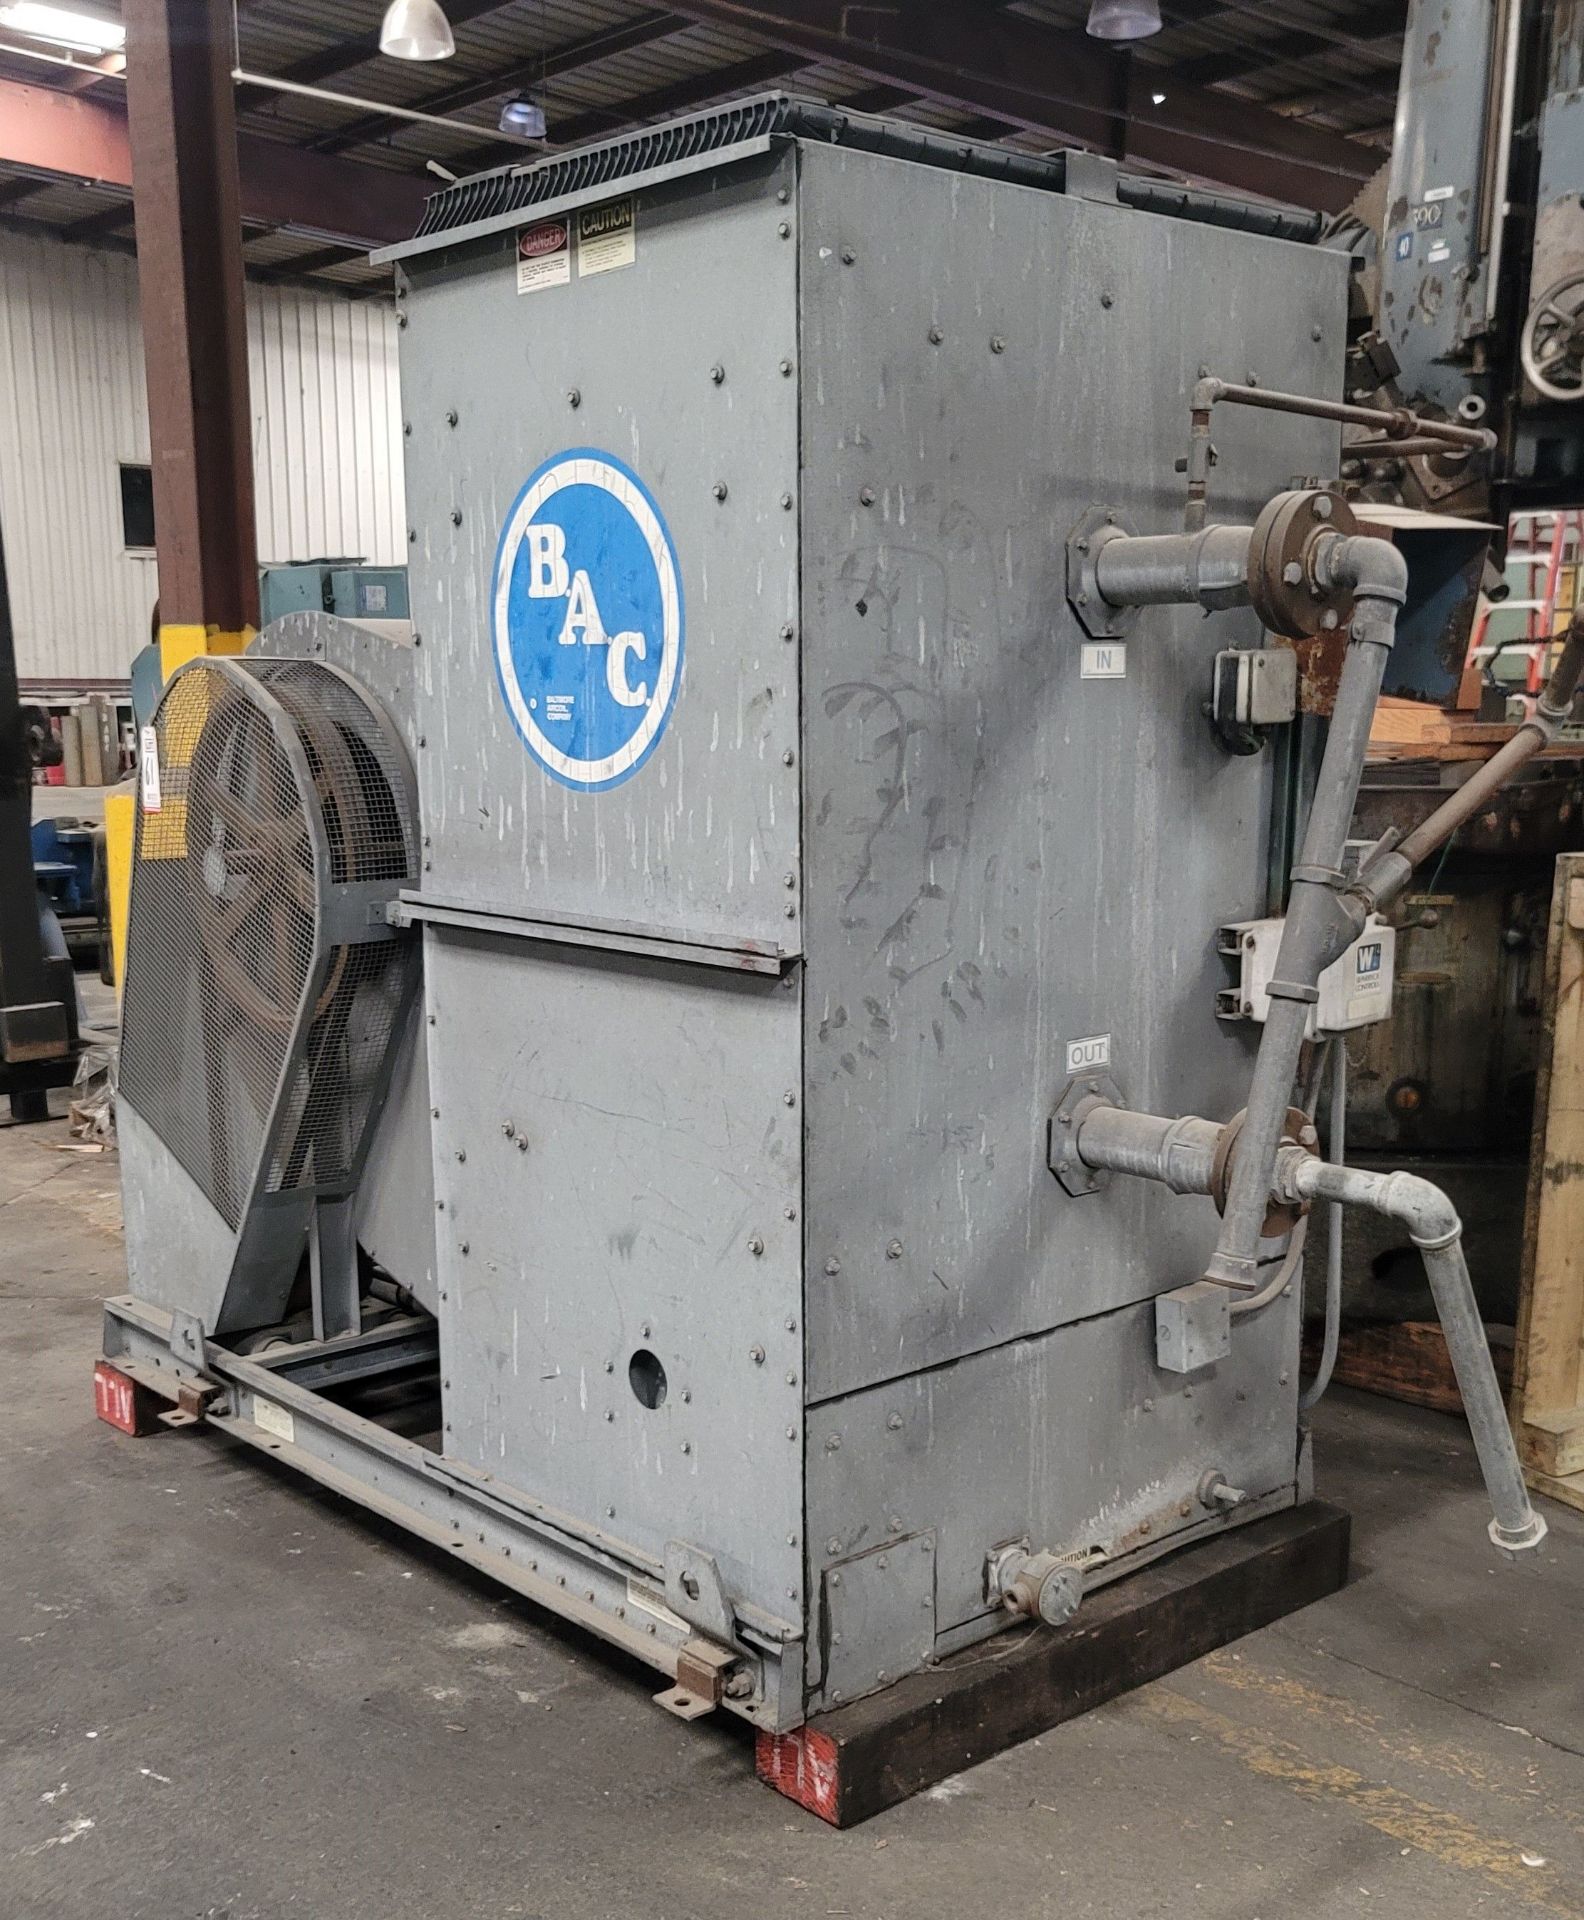 BAC VFL-122G COOLING TOWER/AIR HANDLER, S/N 97210991 - Image 2 of 2